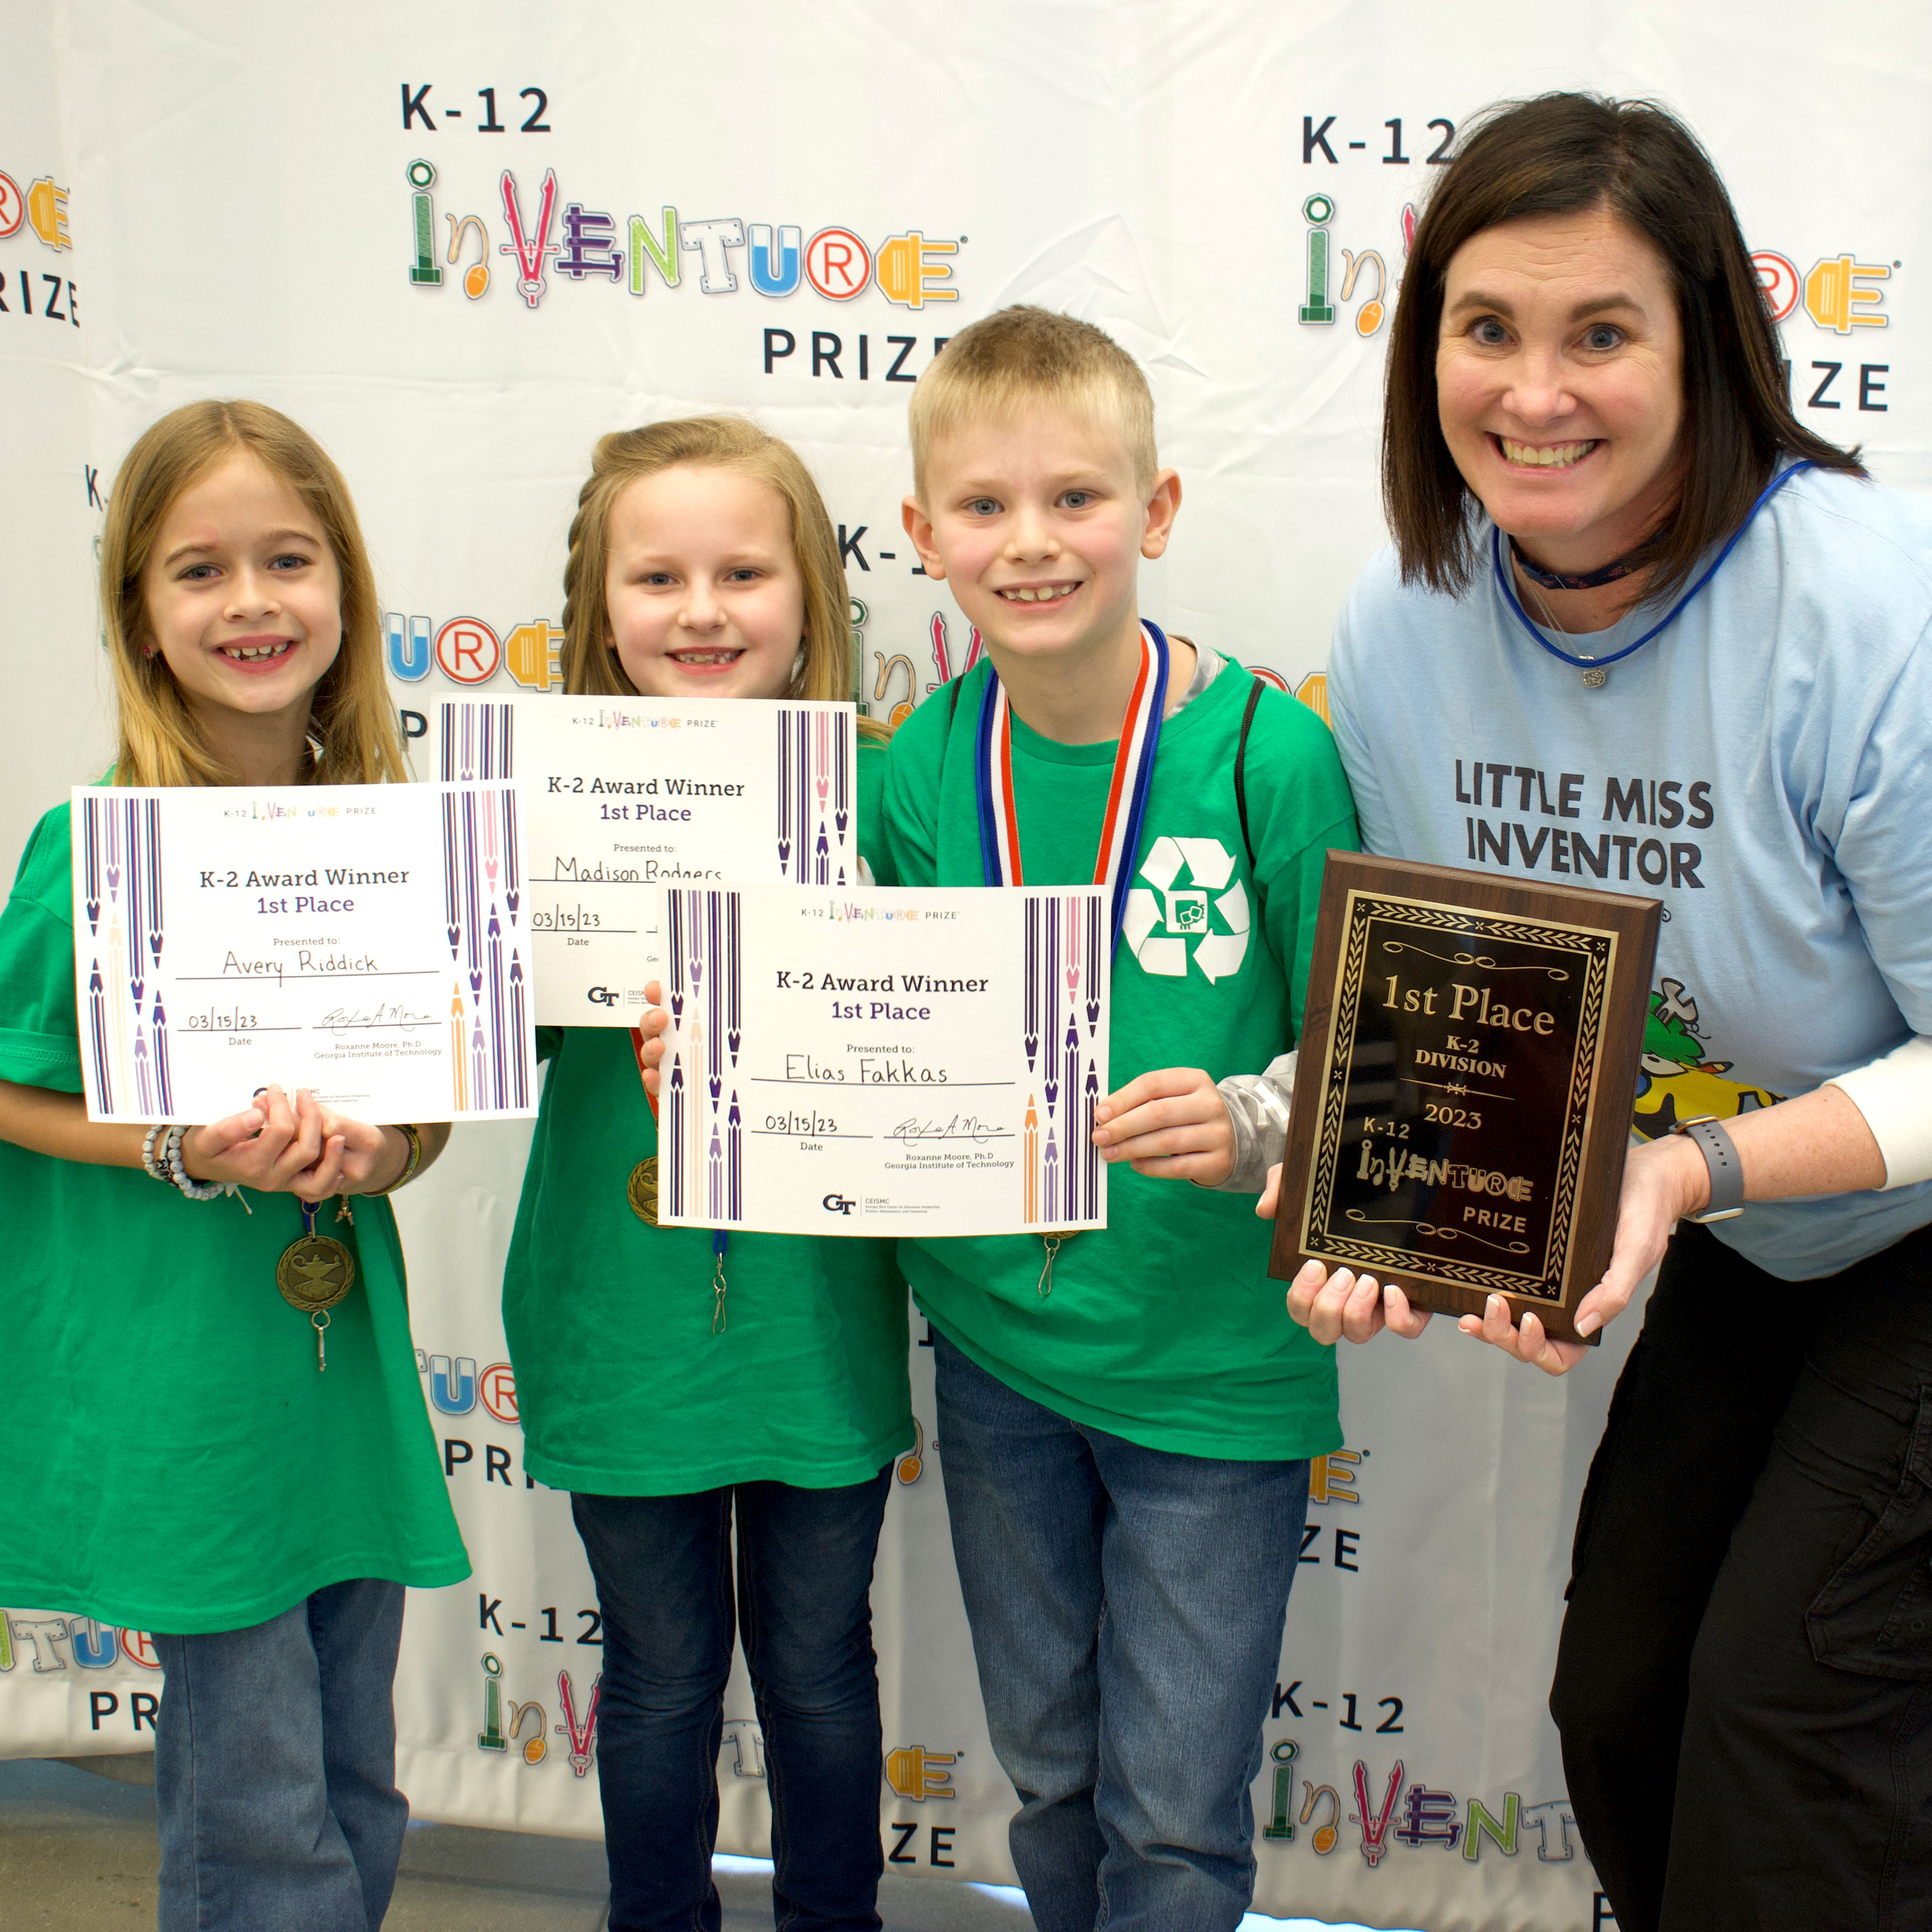 Three smiling students holding up certificates and standing with a smiling teacher holding a plaque